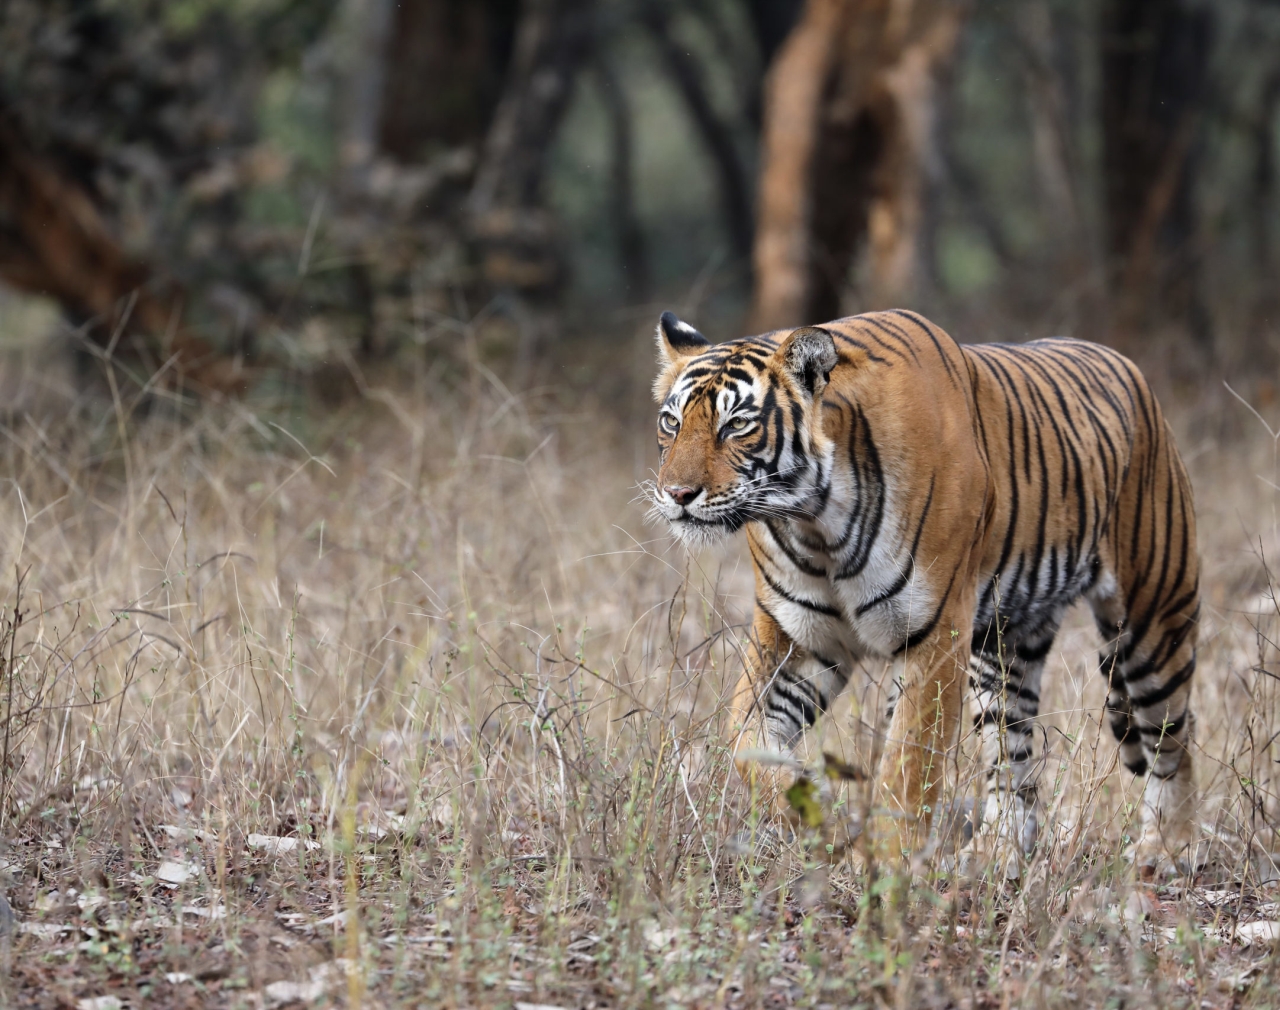 329 Tigers Died in India in 3 Years, 29 Lost to Poaching